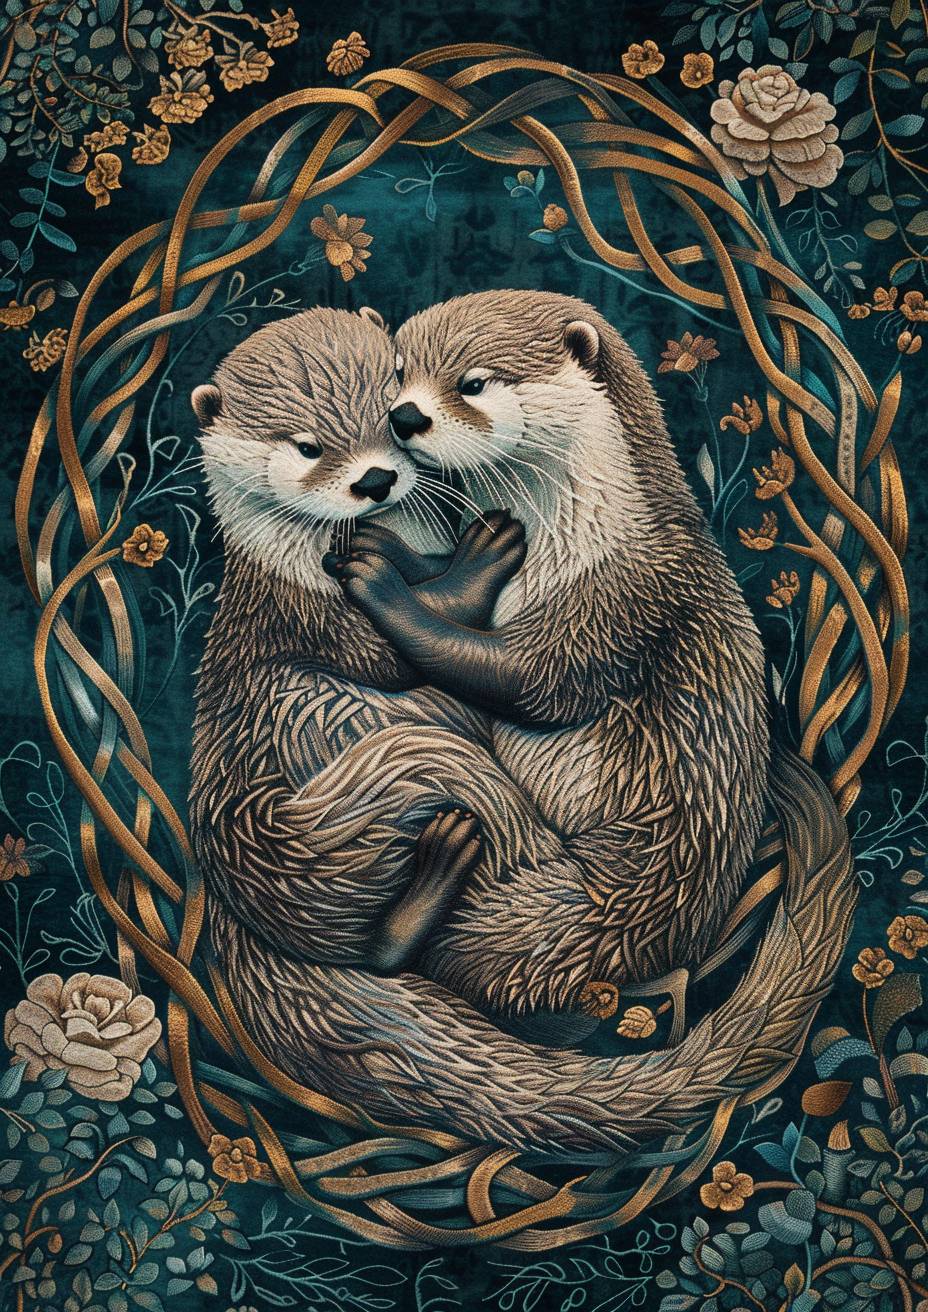 A tapestry featuring two otters intertwined, in the style of Celtic silver knotwork, with a dark background and teal and copper colors, creating a strong visual flow.